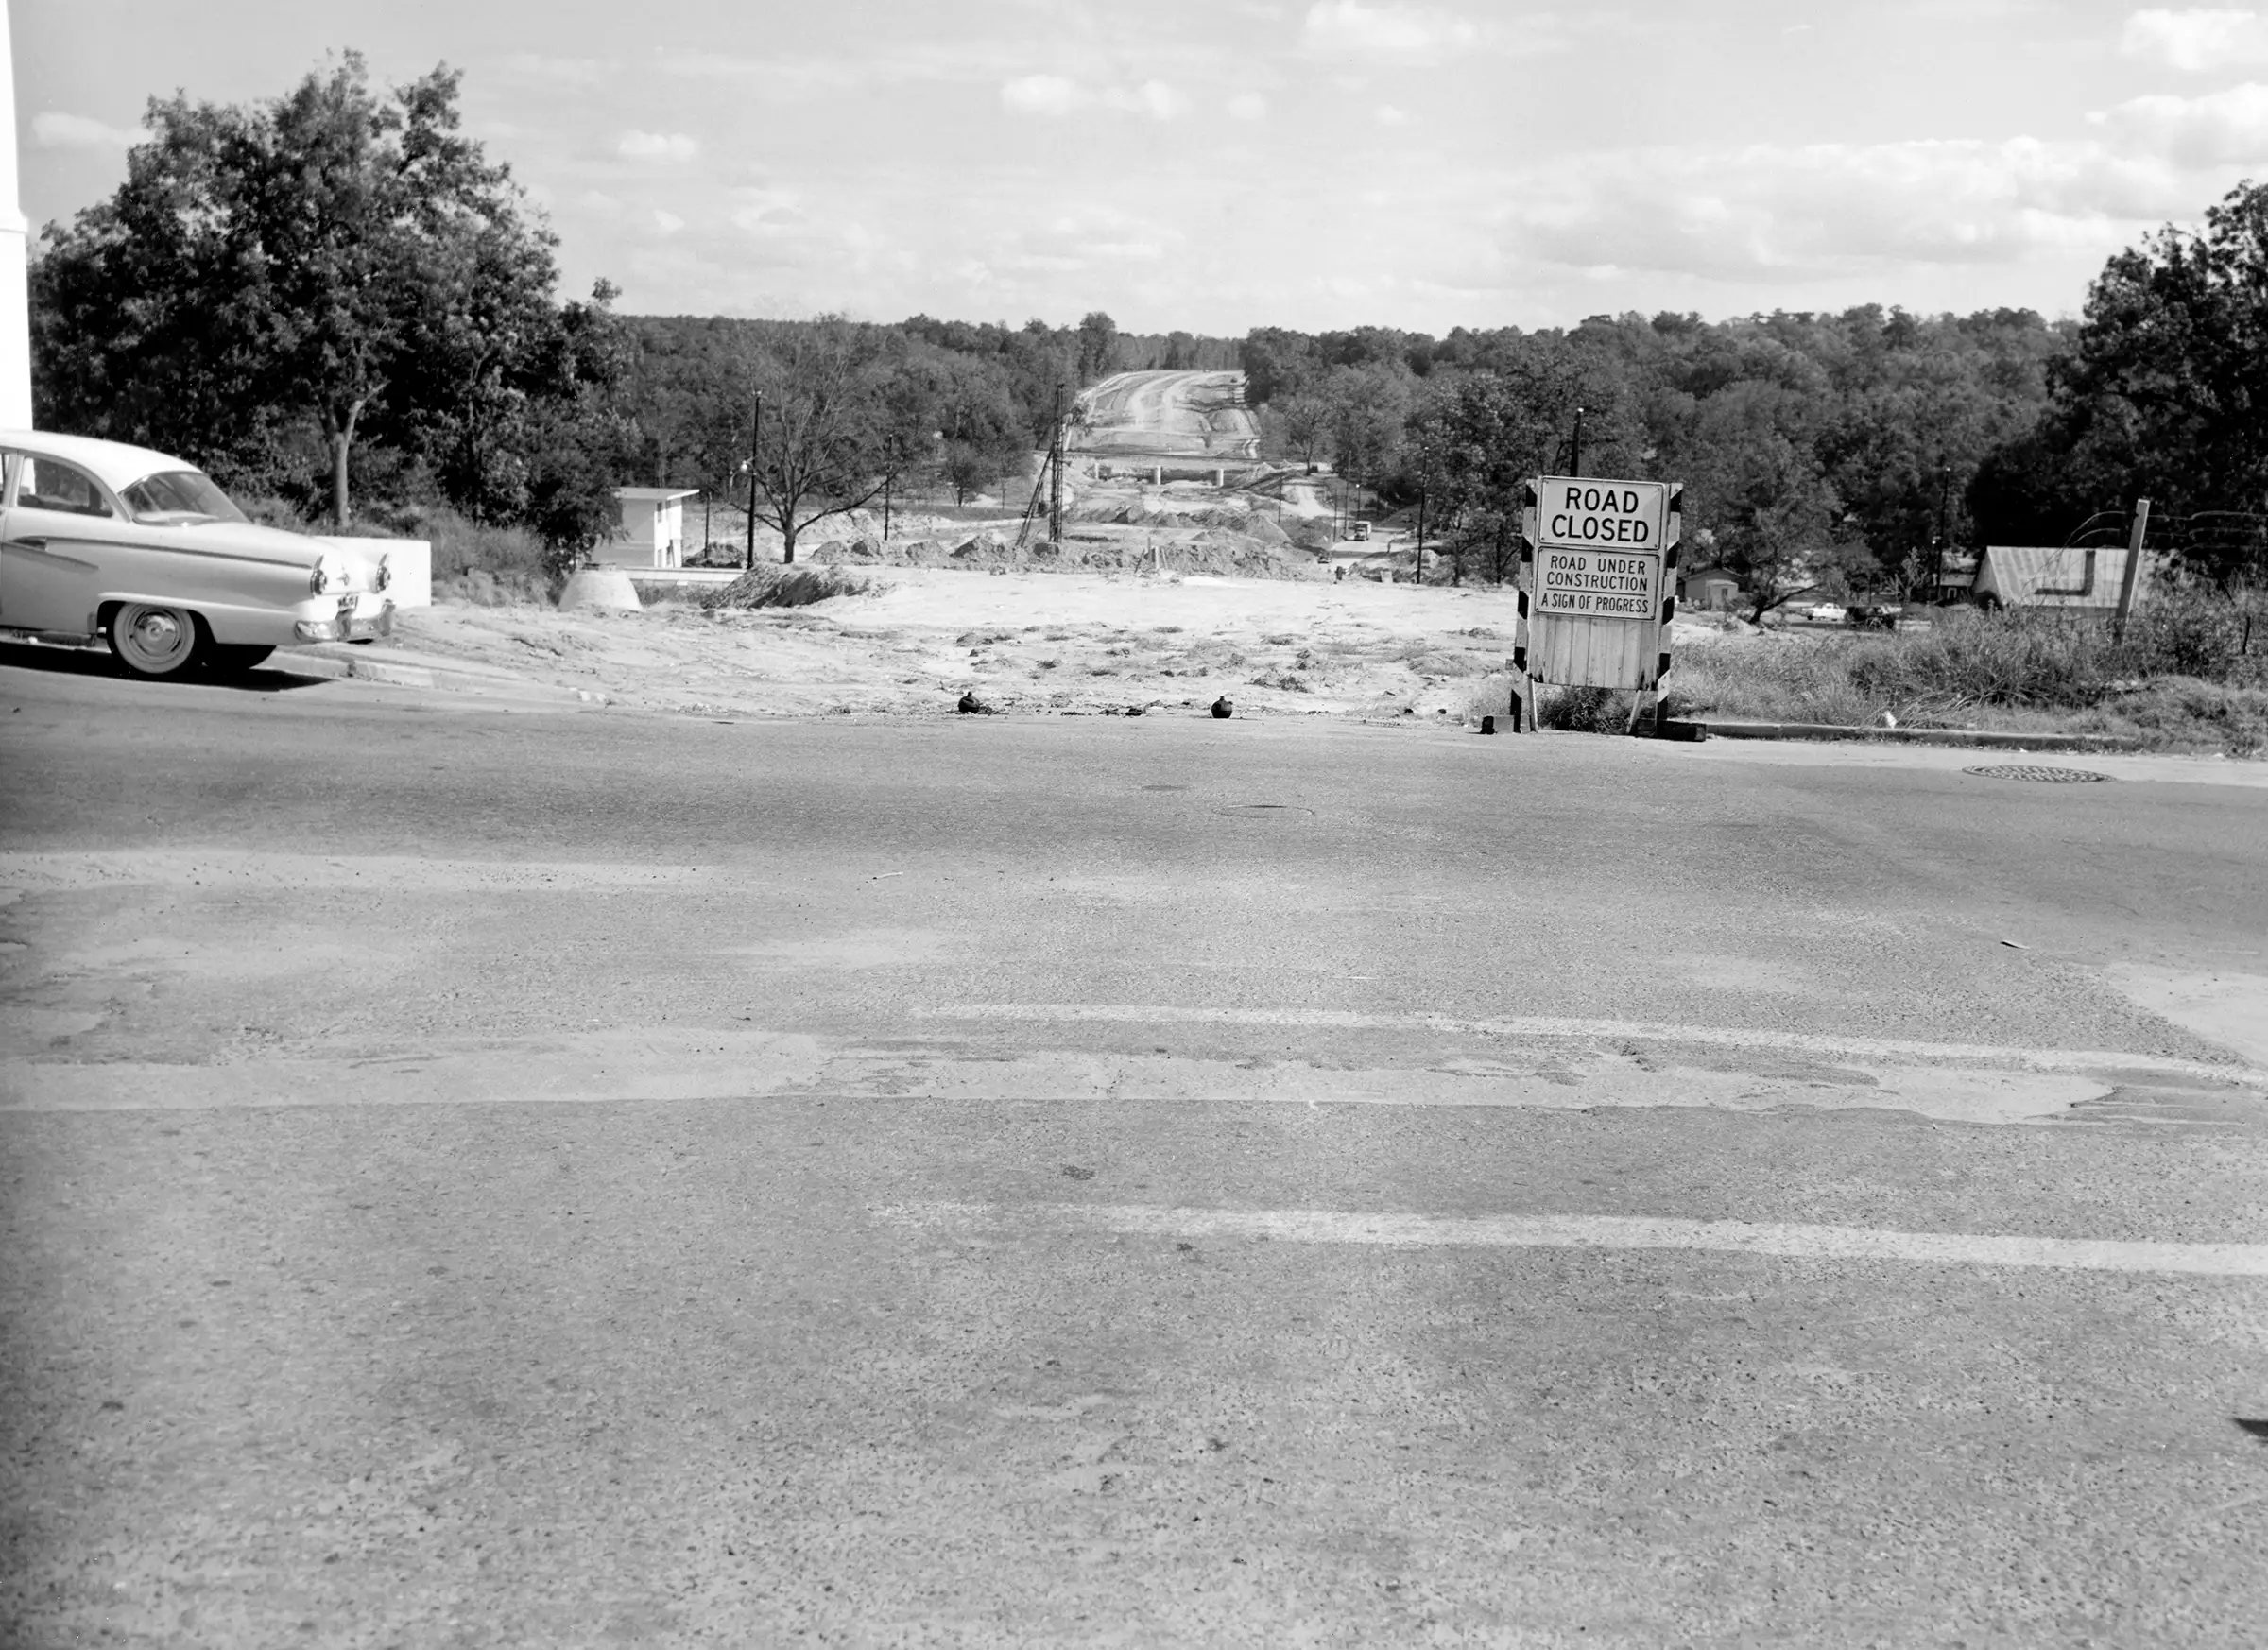 Archival Photo of a Road Under Construction